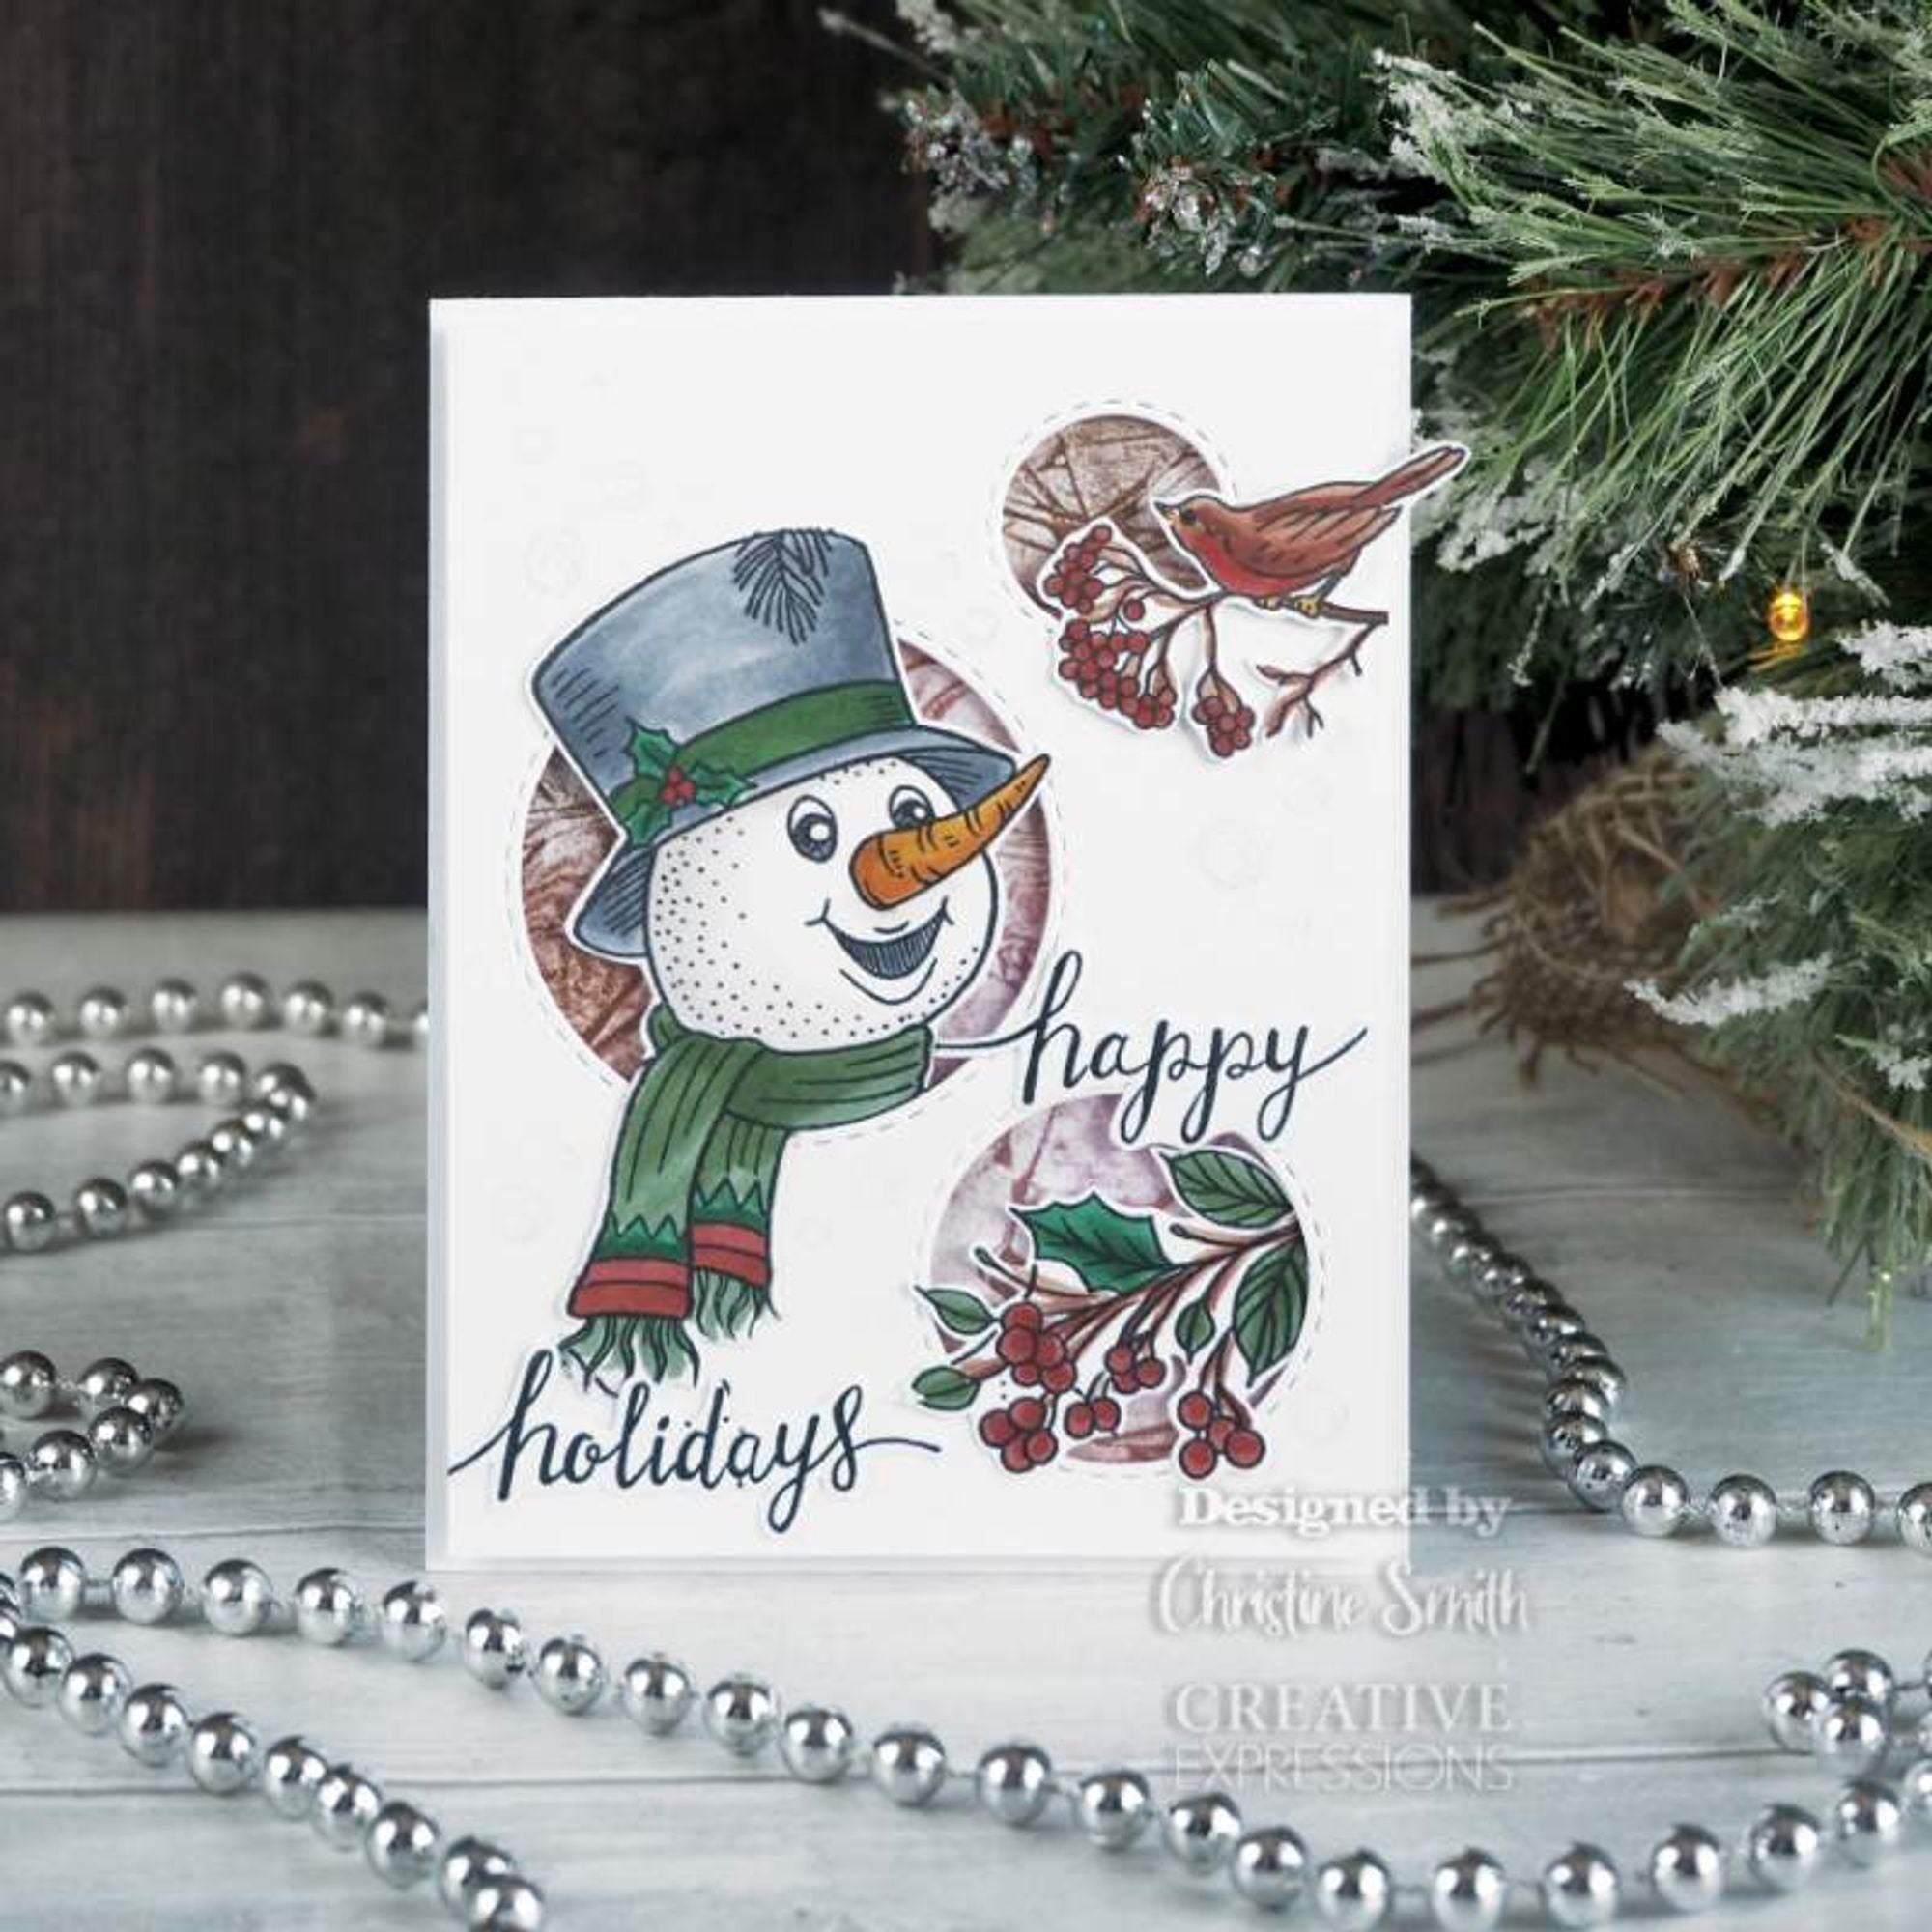 Creative Expressions Designer Boutique Snowy Wishes 6 in x 4 in Clear Stamp Set